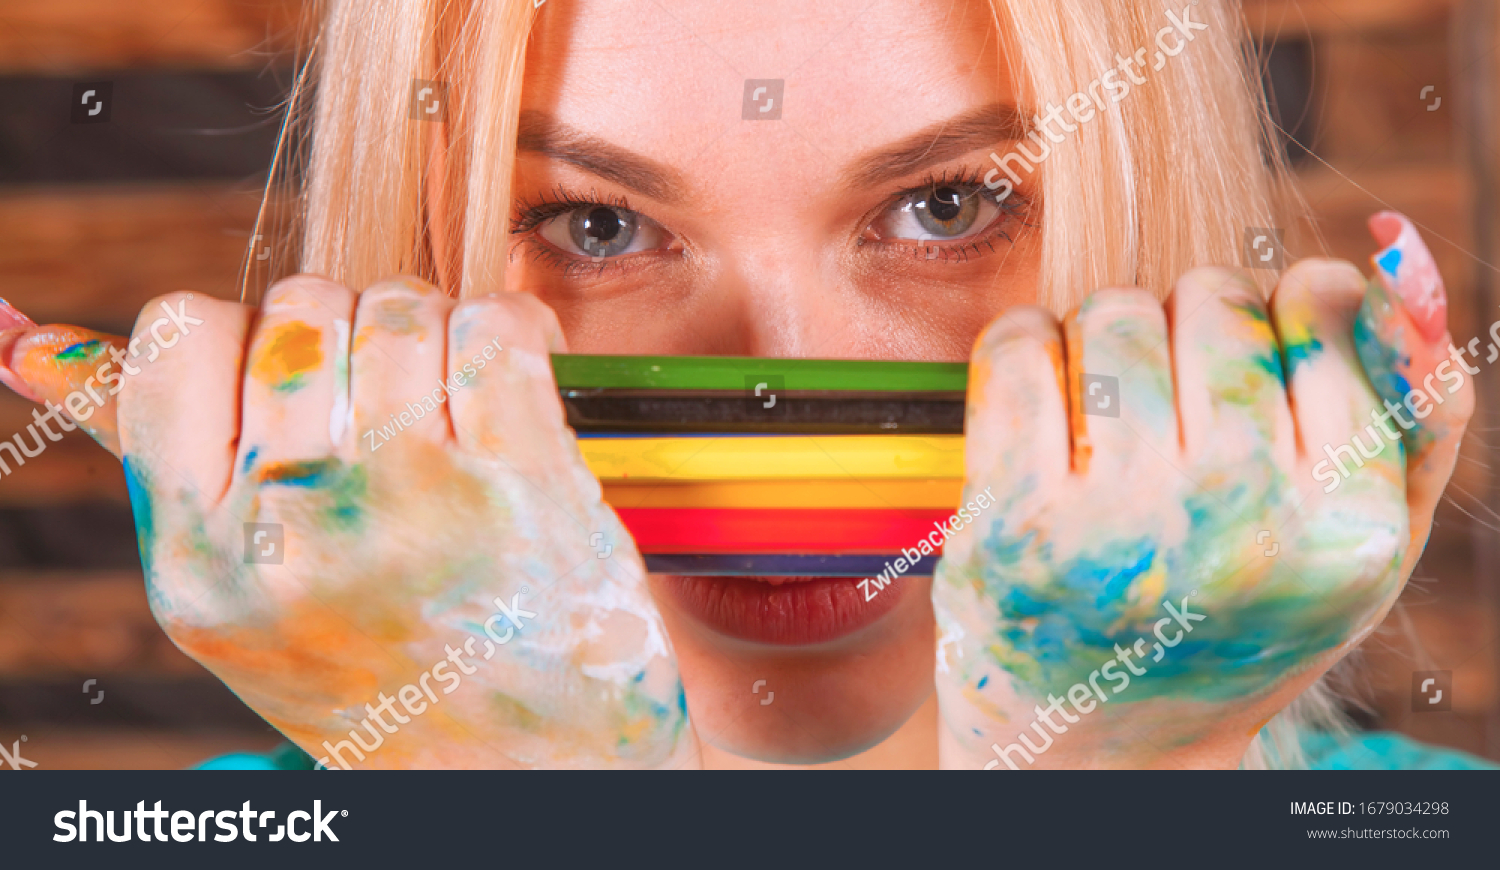 stock-photo-humorous-photo-of-great-artist-portrait-of-beautiful-young-woman-painting-with-colored-pencils-1679034298